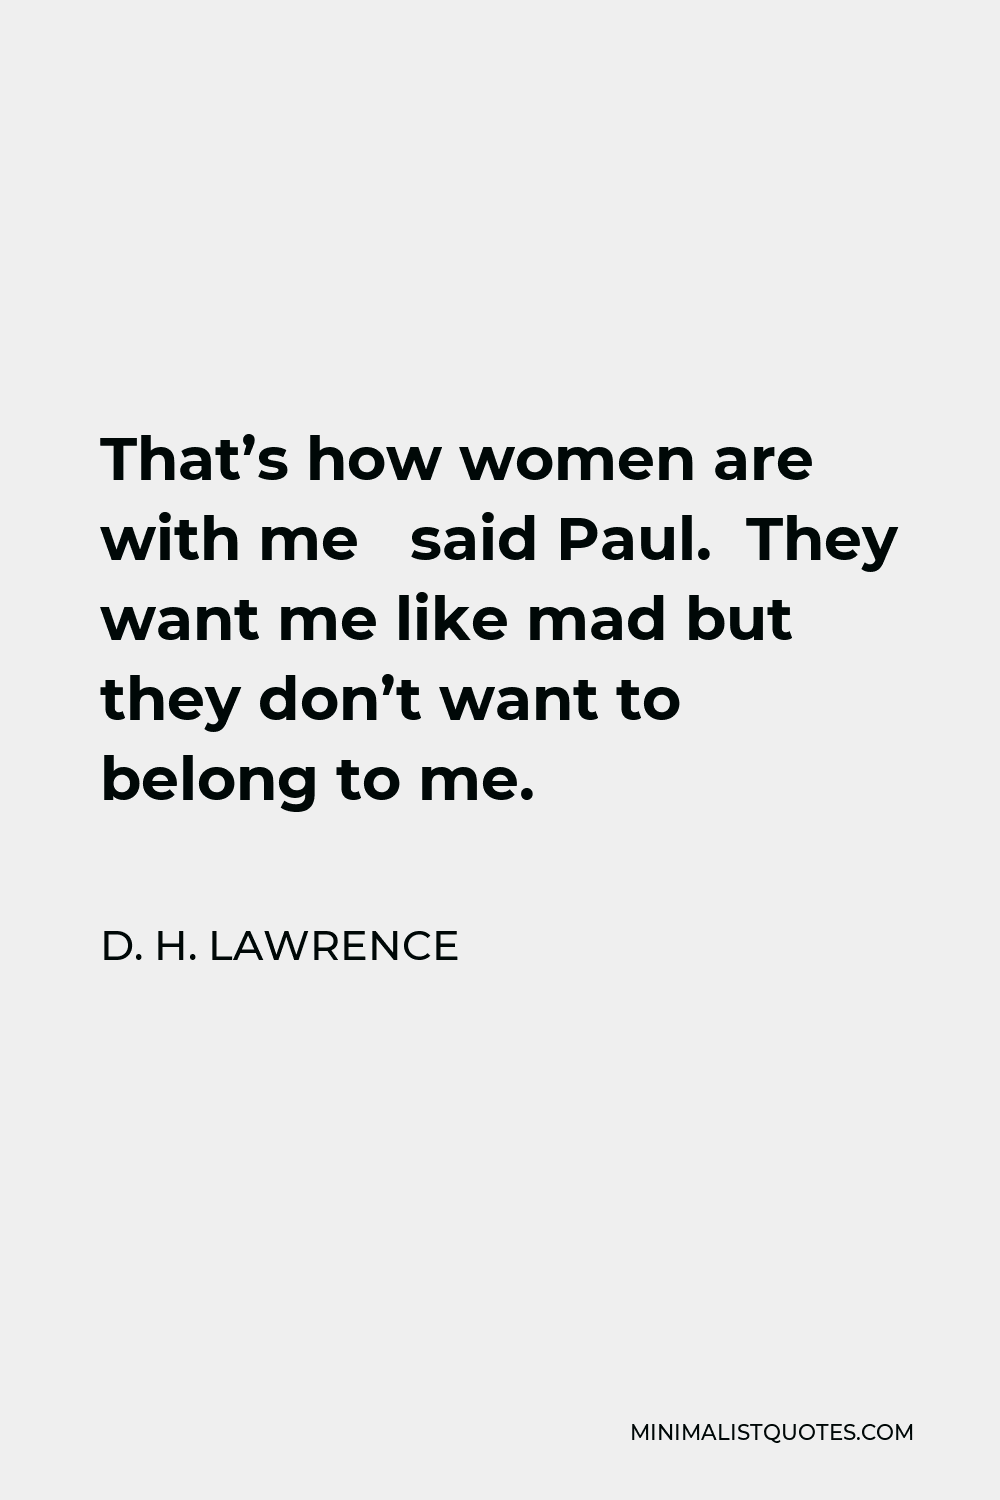 D H Lawrence Quote Thats How Women Are With Me Said Paul They Want Me Like Mad But They Don 9433